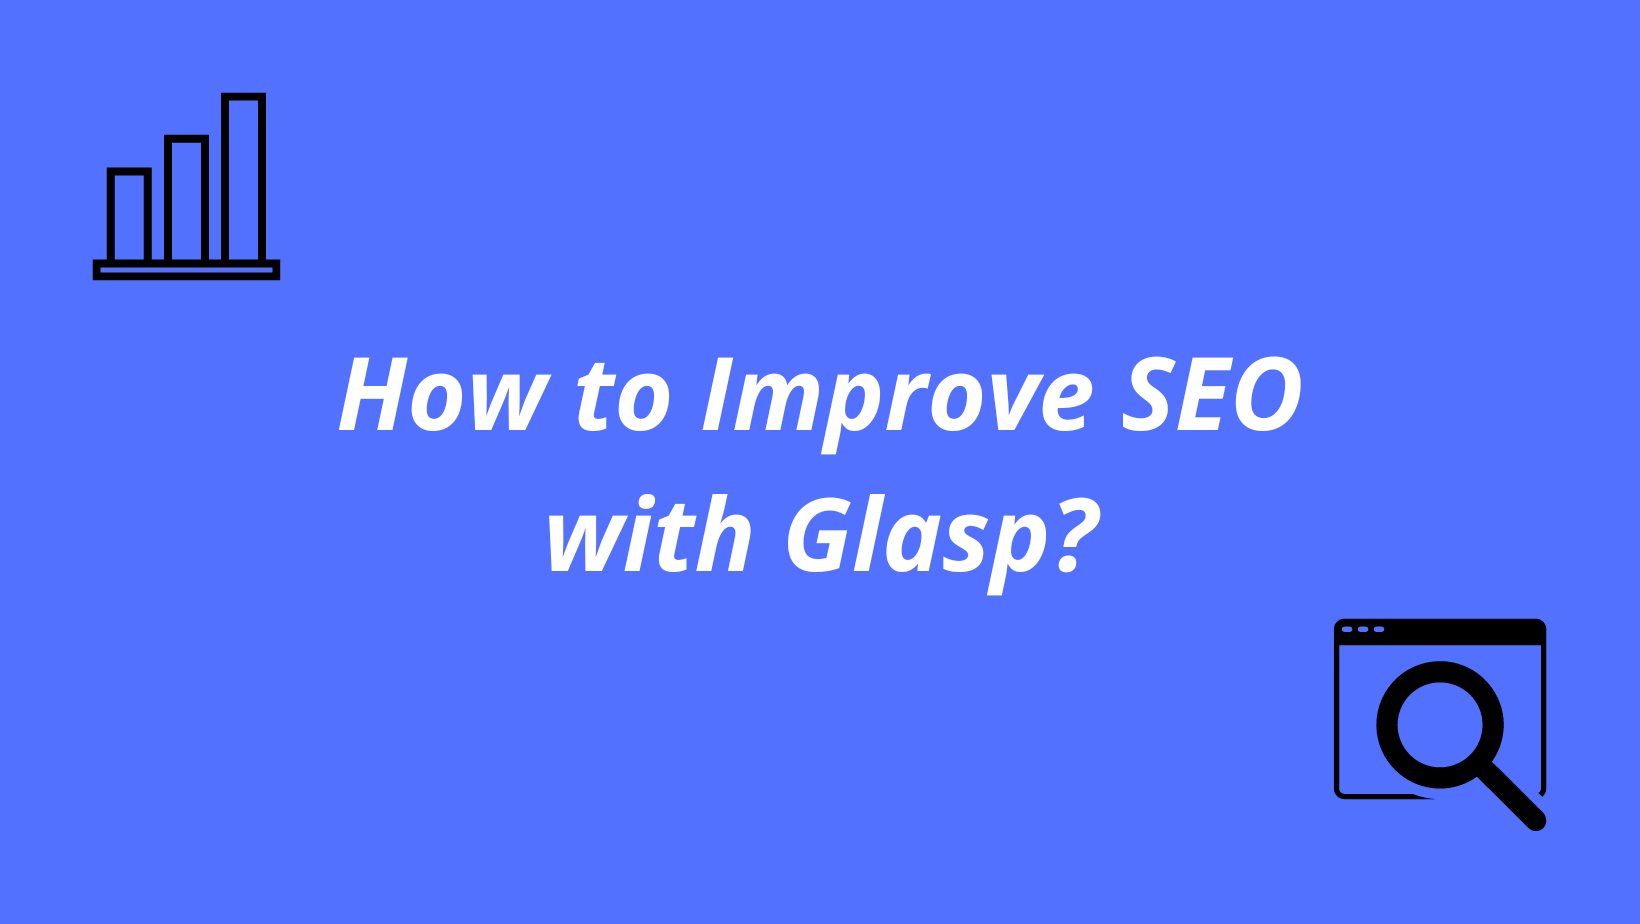 How to Improve SEO with Glasp?